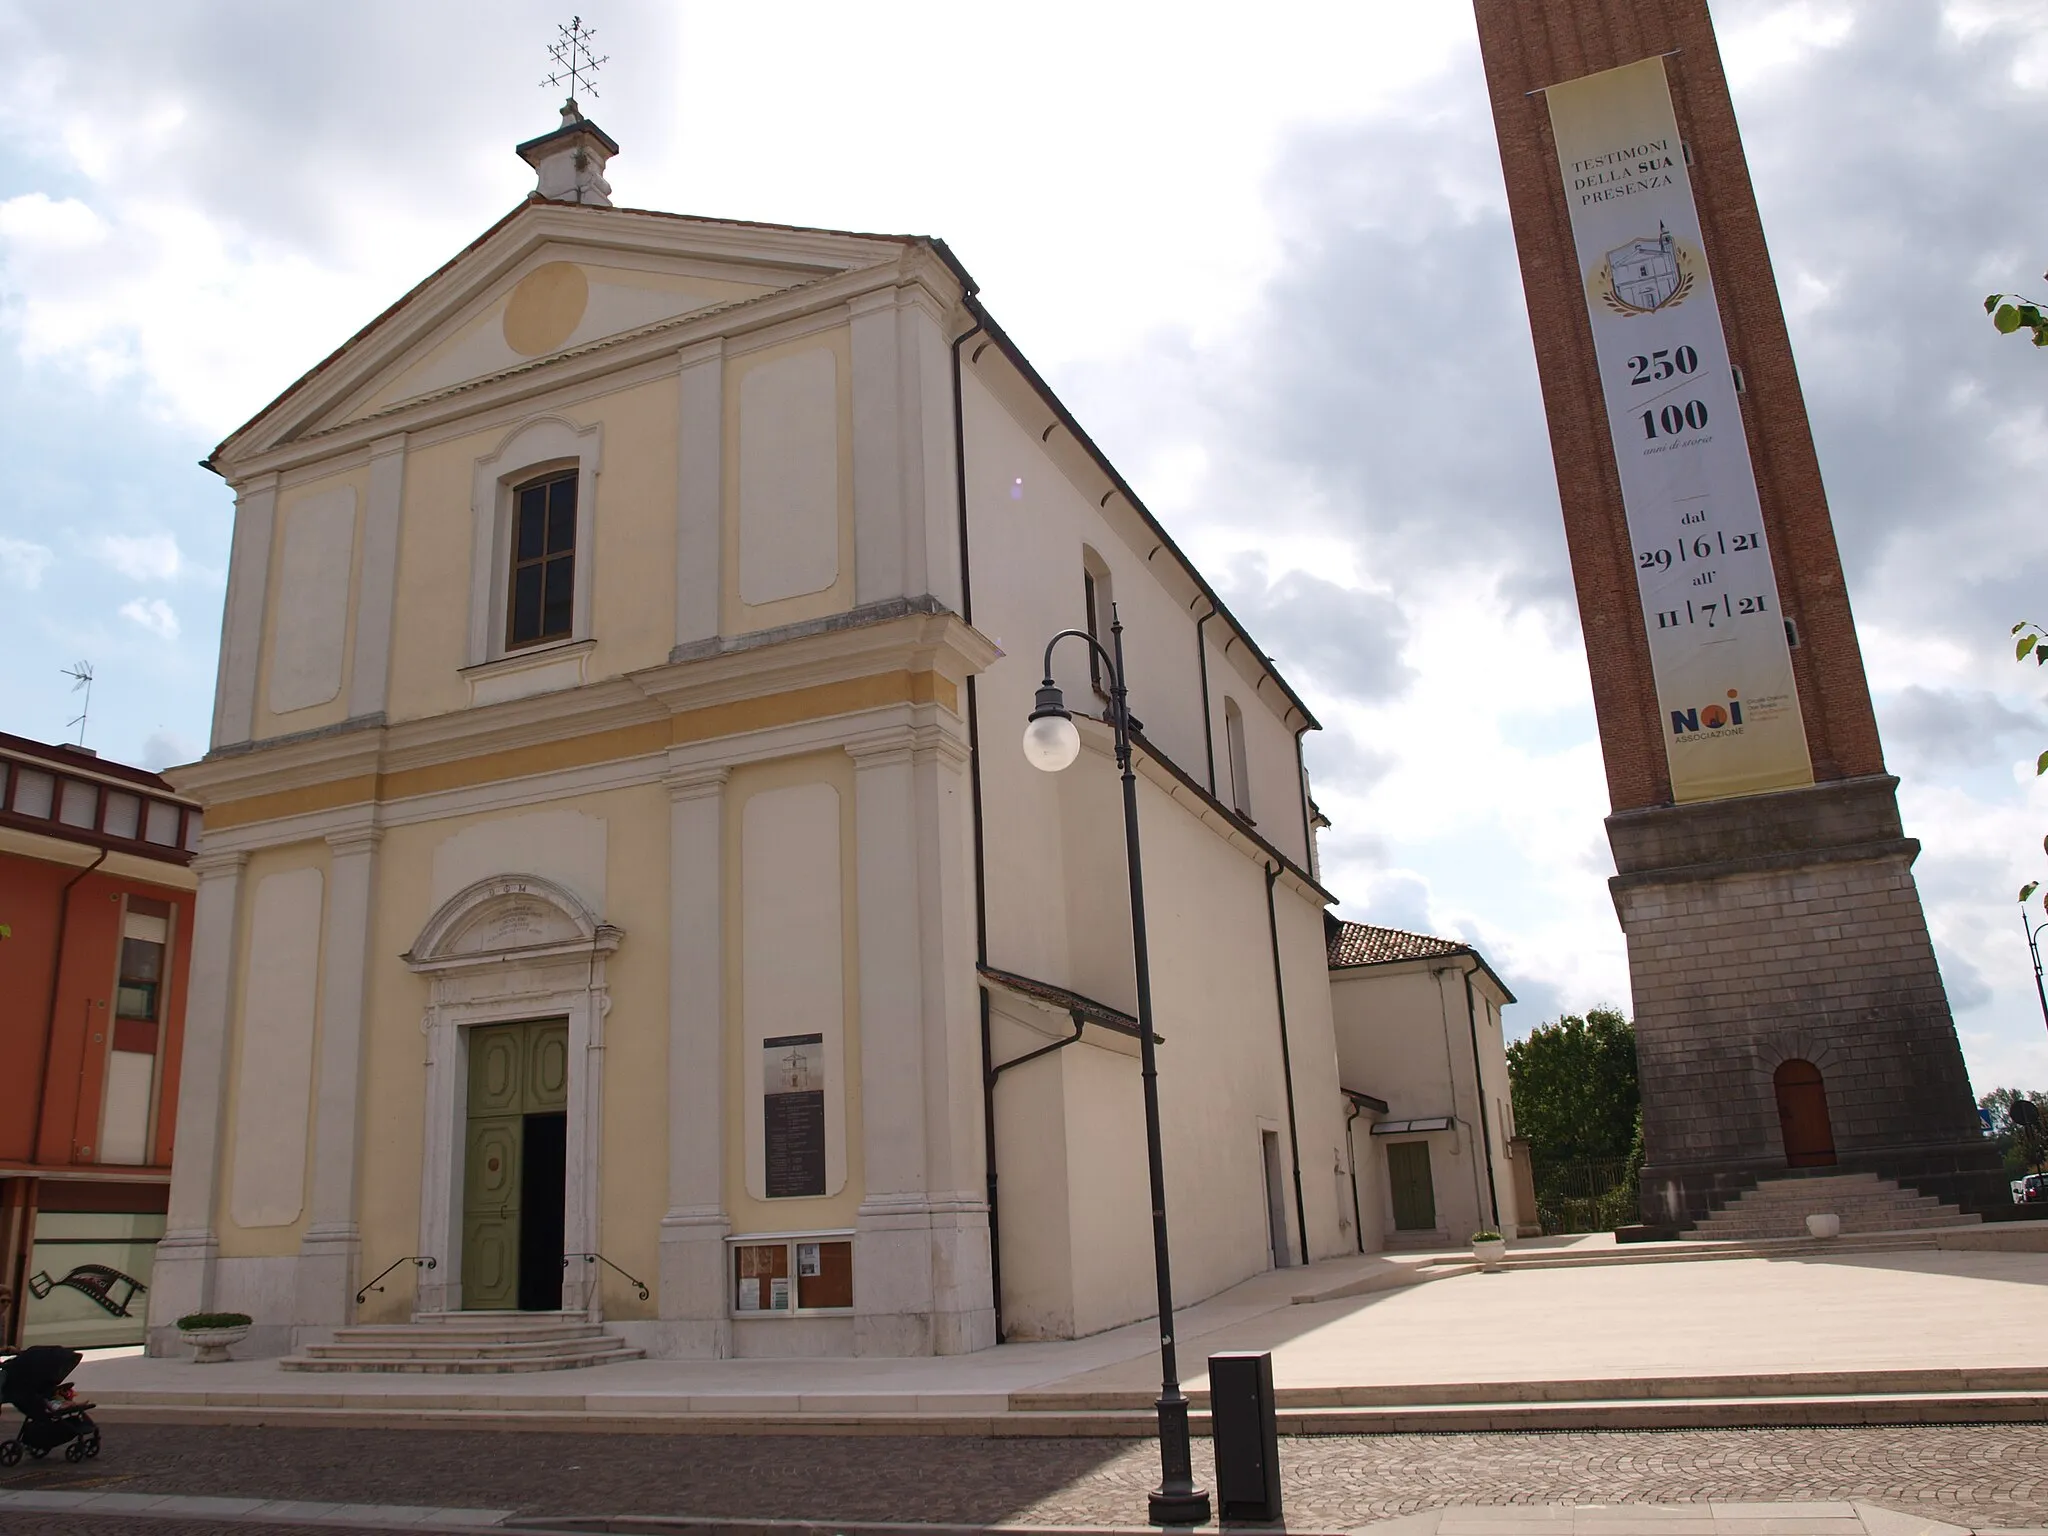 Photo showing: The facade, outside wall and part of the bell tower of the chiesa di San Pietro Apostolo (Saint Peter the Apostle church) in Azzano Decimo.